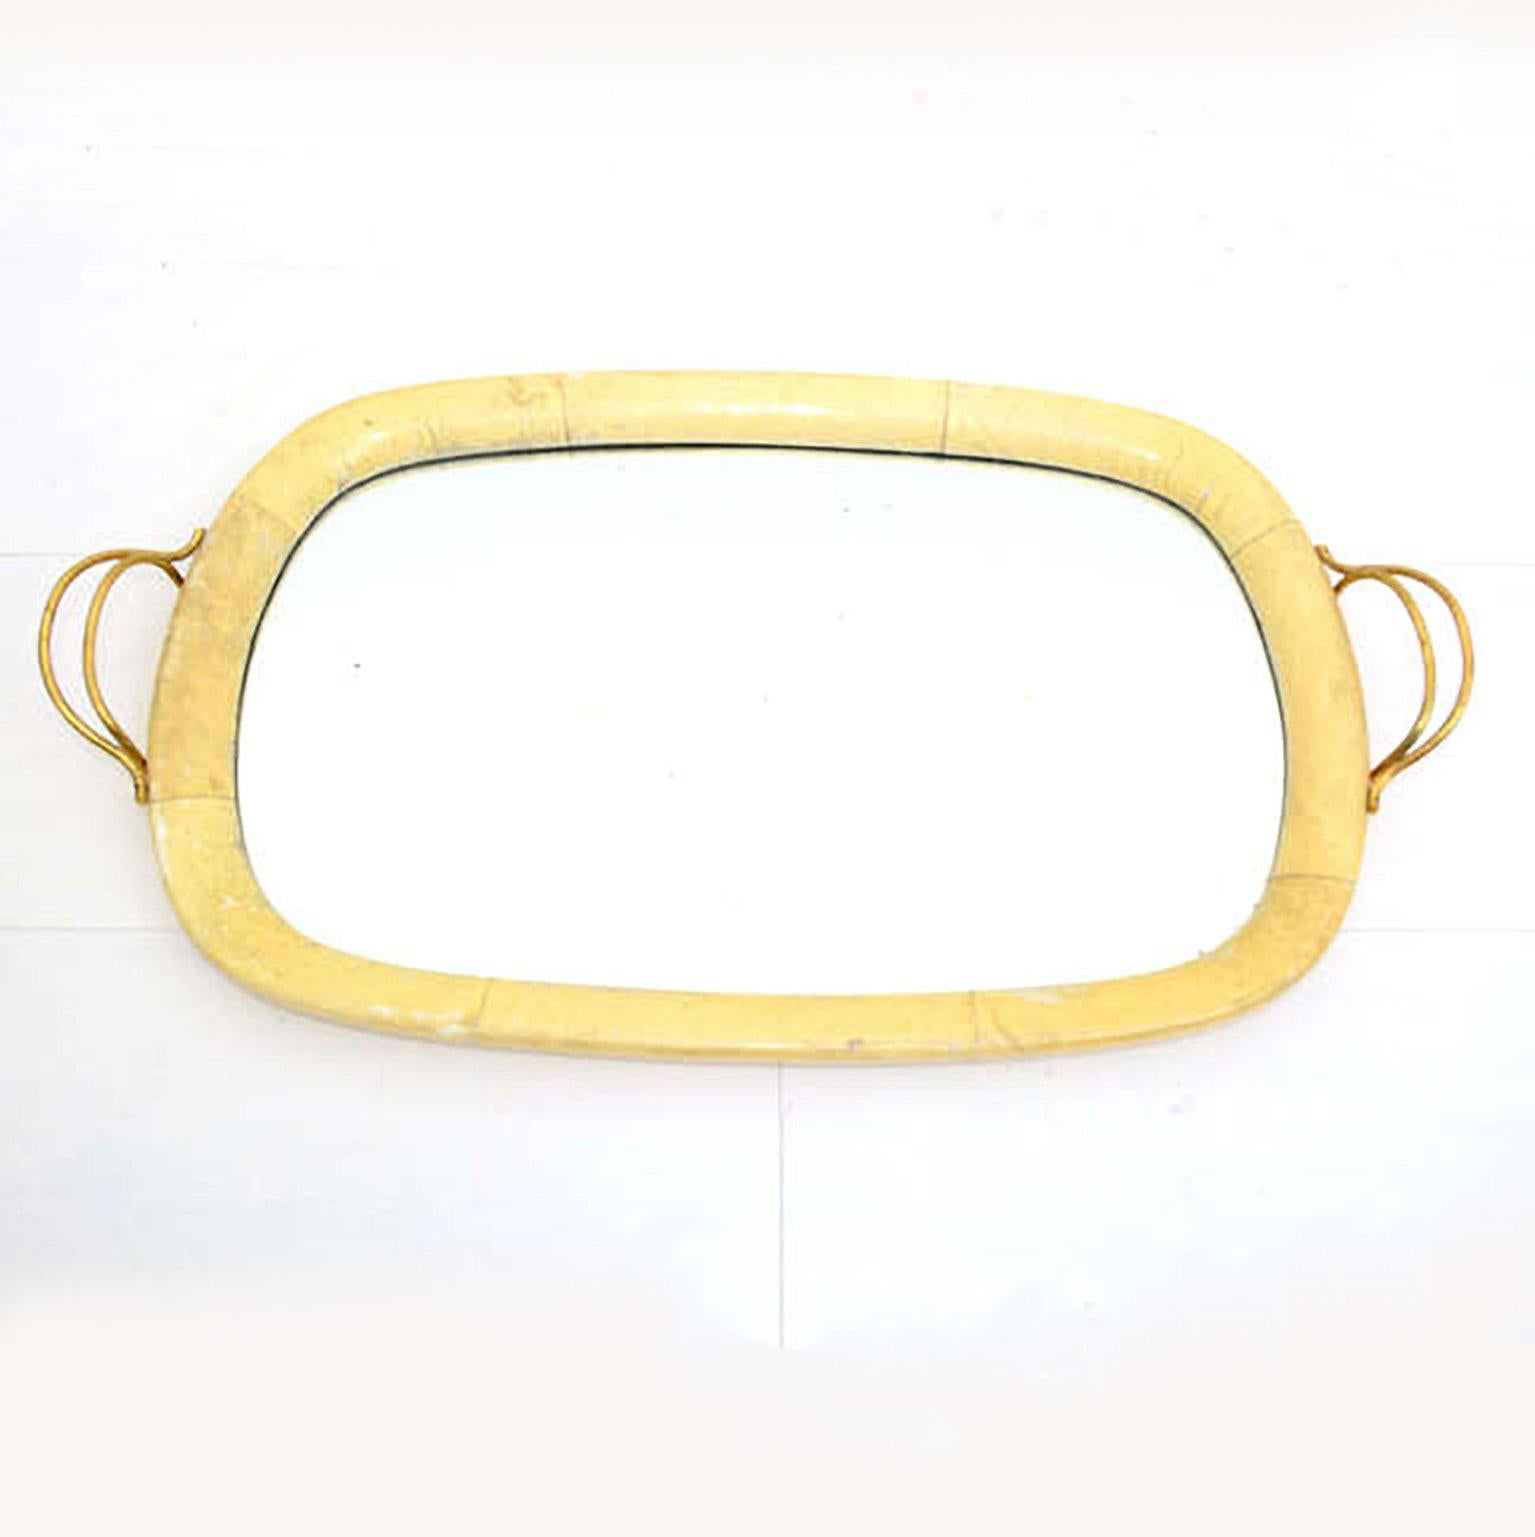 Aldo Tura made in Italy by Macabo 1950s 
Exquisite serving tray goatskin mirrored glass with sculptural brass handles
Original mirror.
Dimensions: 24W x 13.75 x 1.5H
Original unrestored vintage condition finish with patina is present. 
Parchment